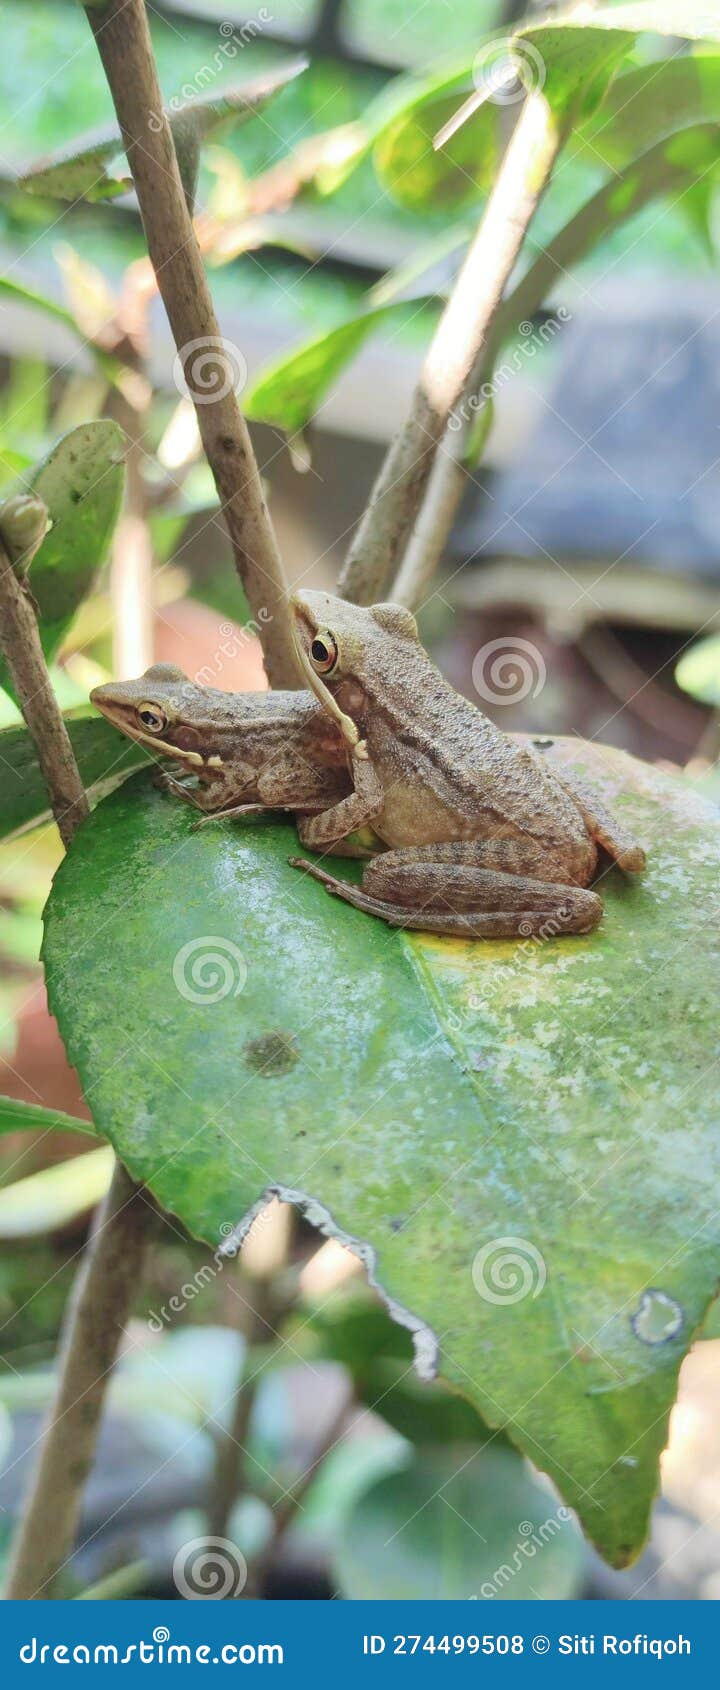 Two Little Frogs on Leaves in the Garden Stock Photo - Image of